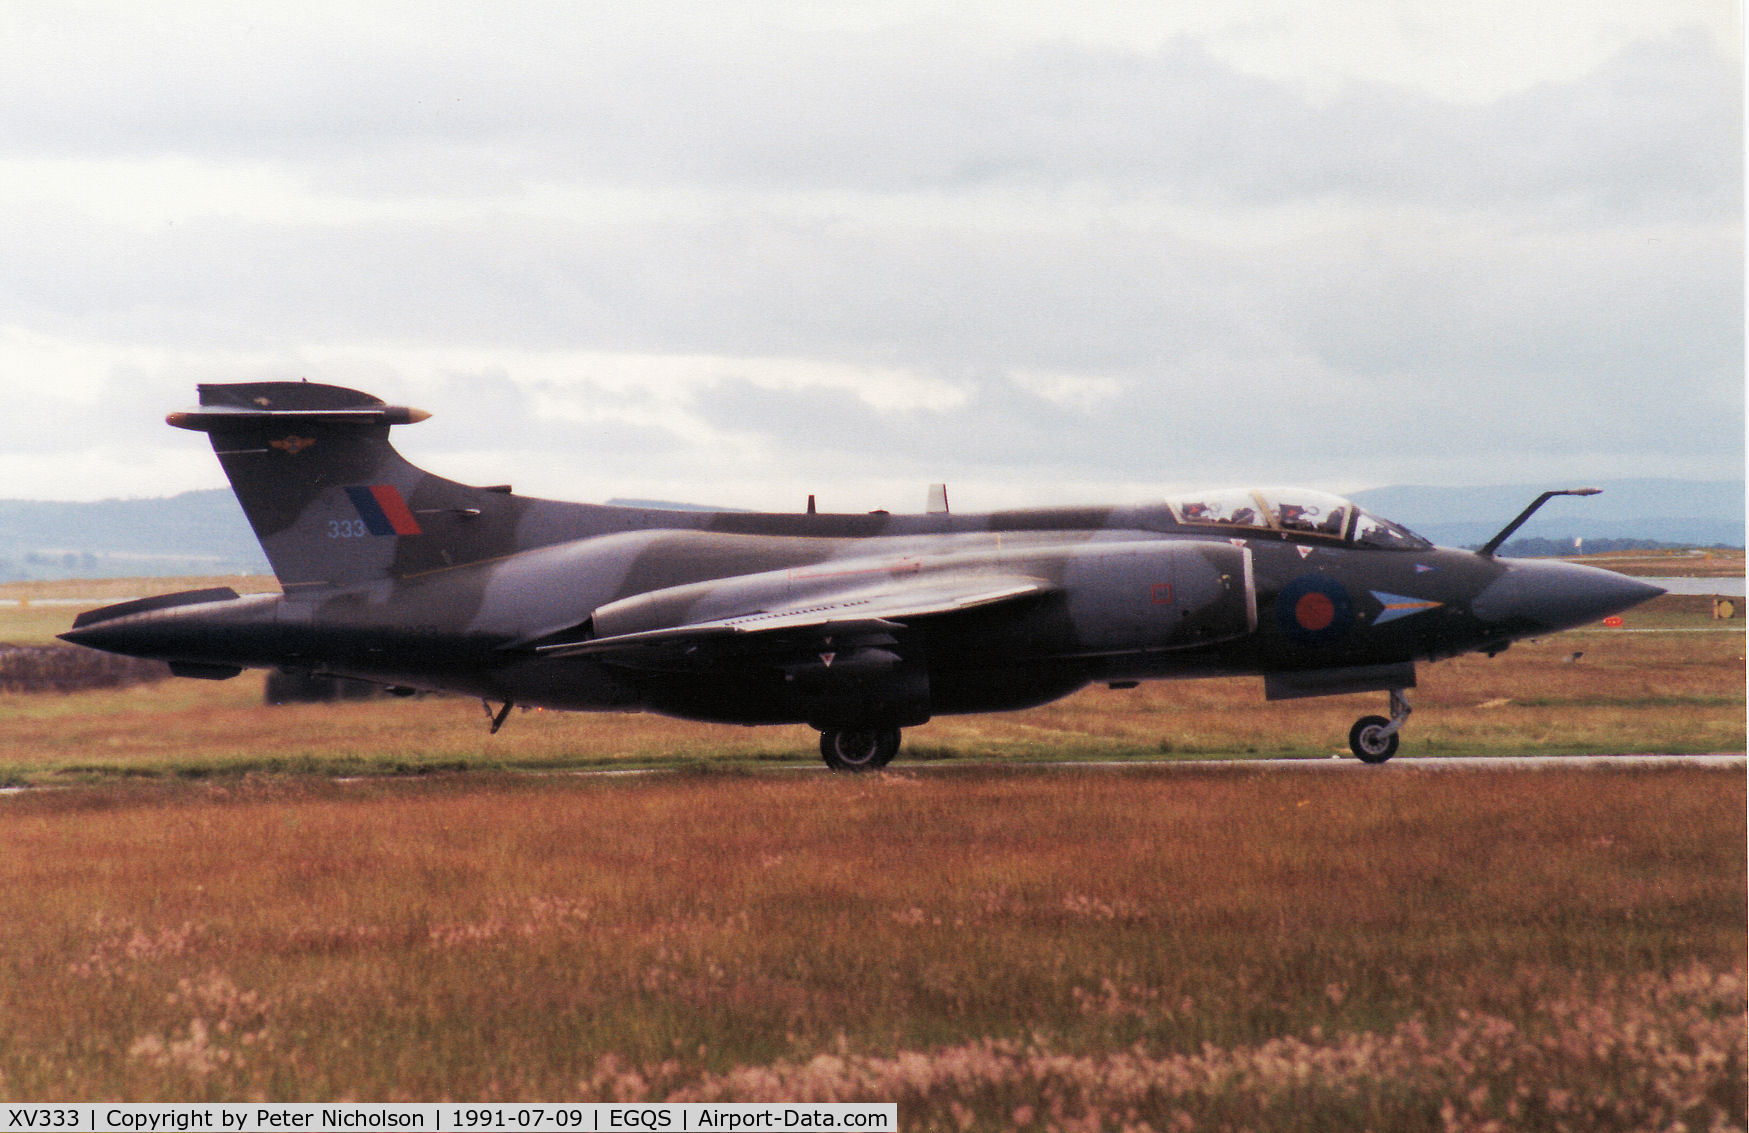 XV333, 1967 Hawker Siddeley Buccaneer S.2B C/N B3-11-66, Buccaneer S.2B of 208 Squadron preparing to join the active runway at Lossiemouth in May 1991.